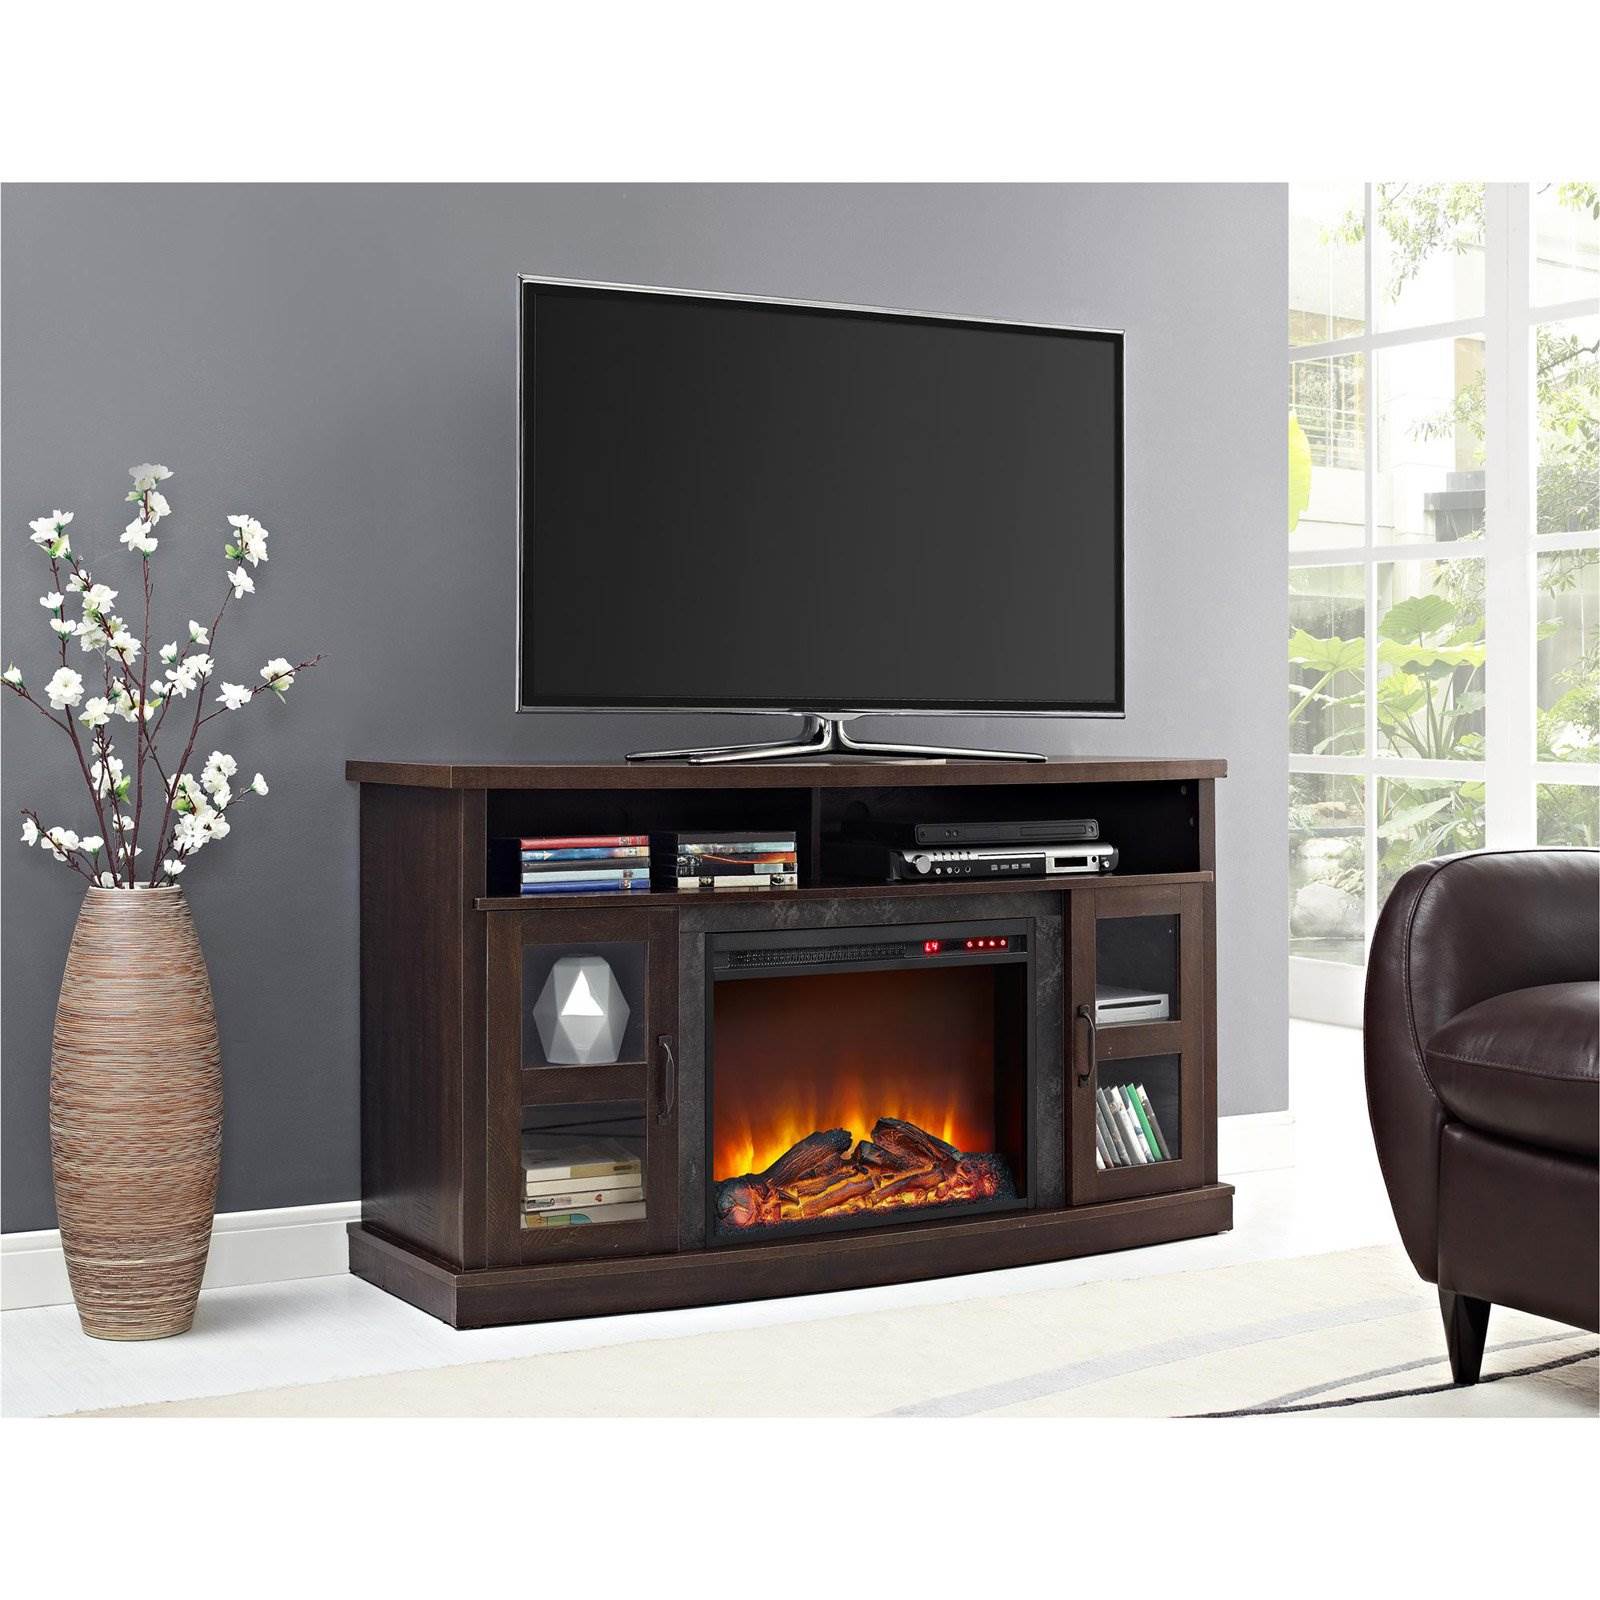 Fireplace Entertainment Center Big Lots Elegant White Electric Fireplace Tv Stand